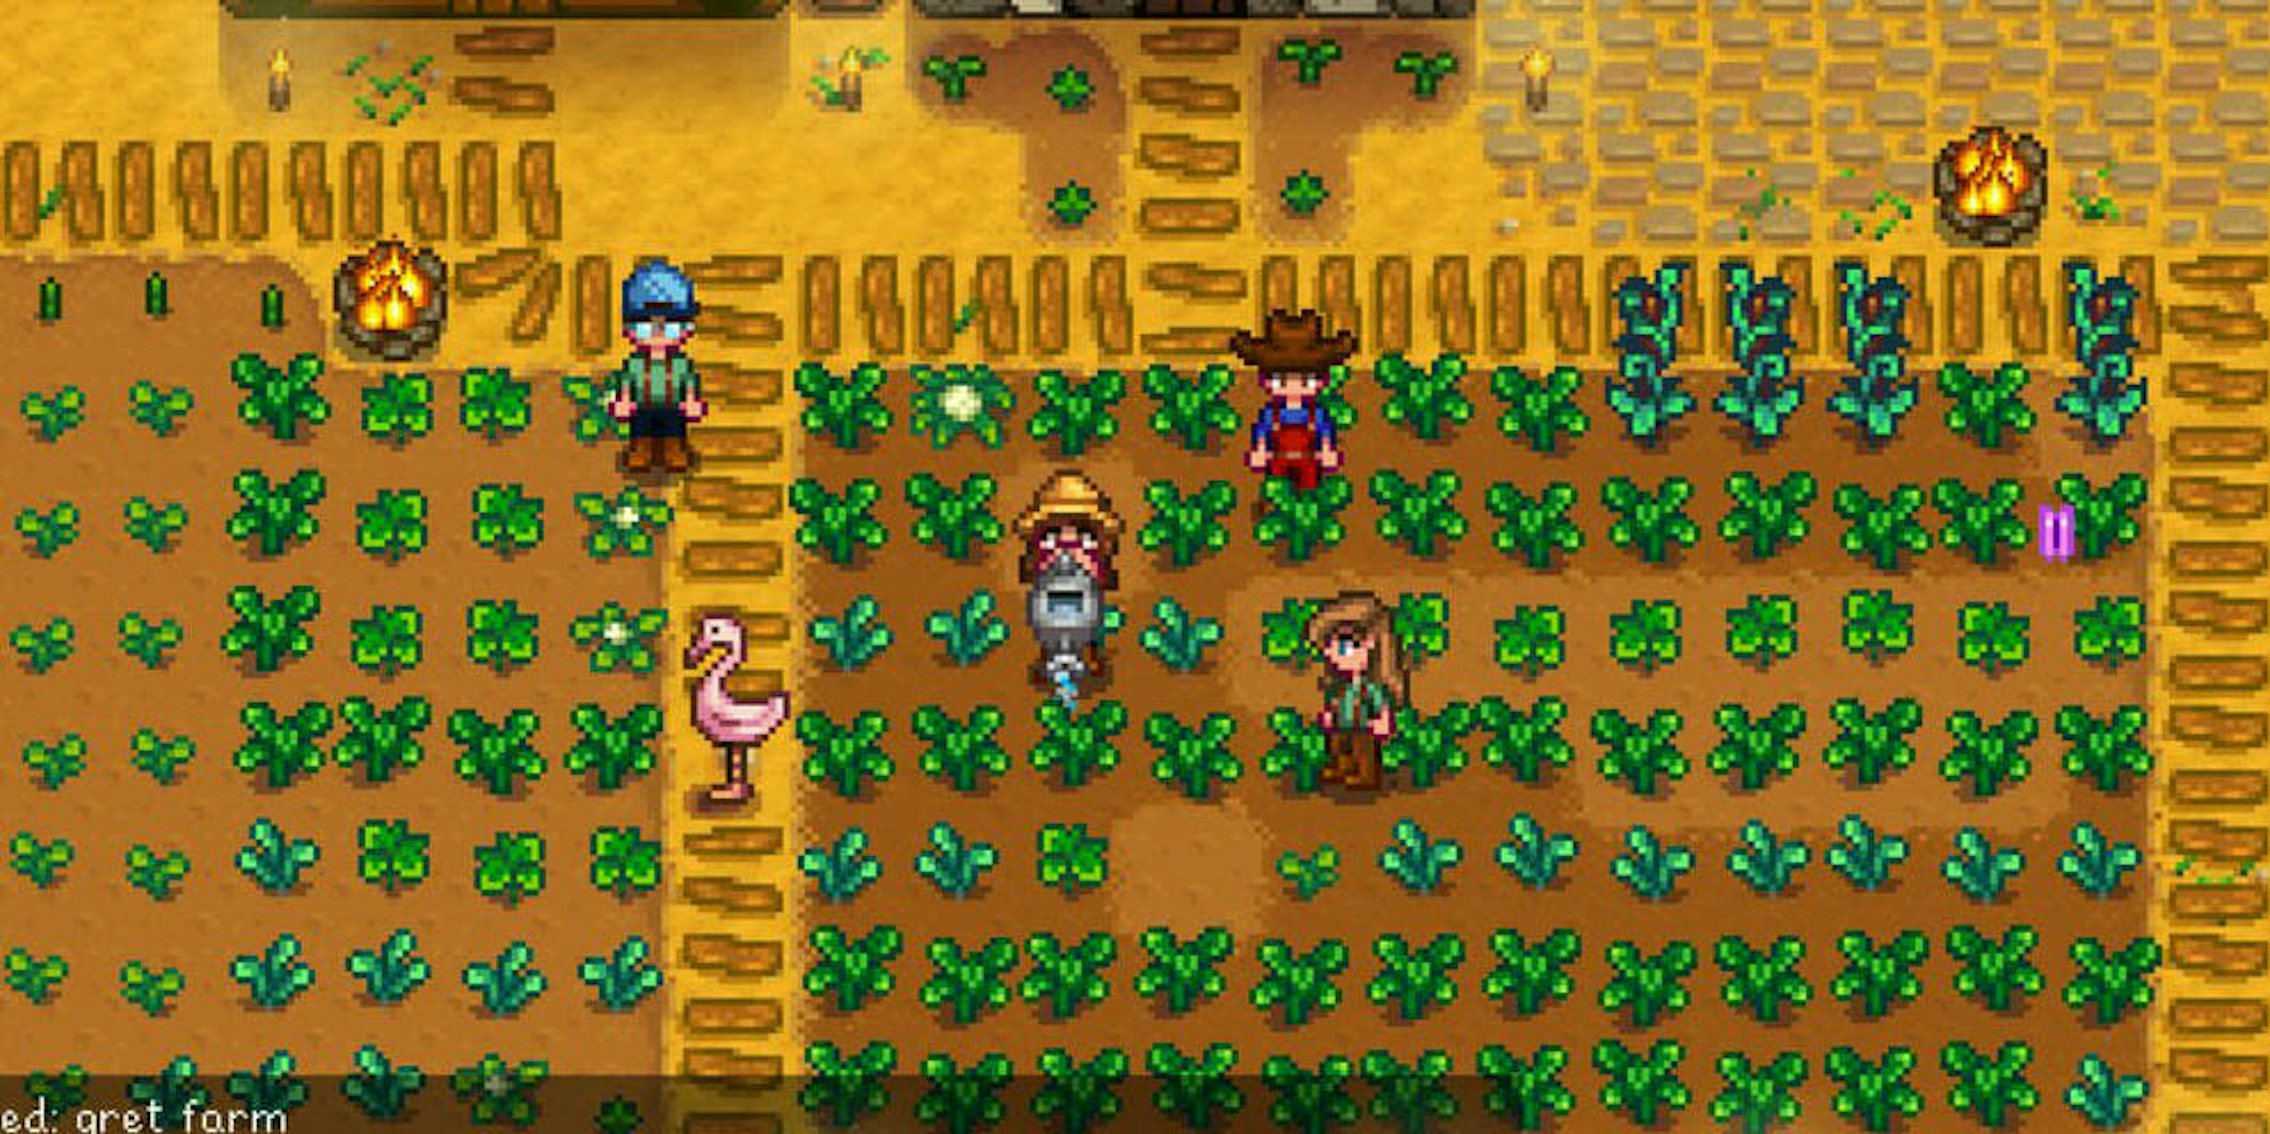 Stardew Valley Multiplayer Beta is Available Now on Steam